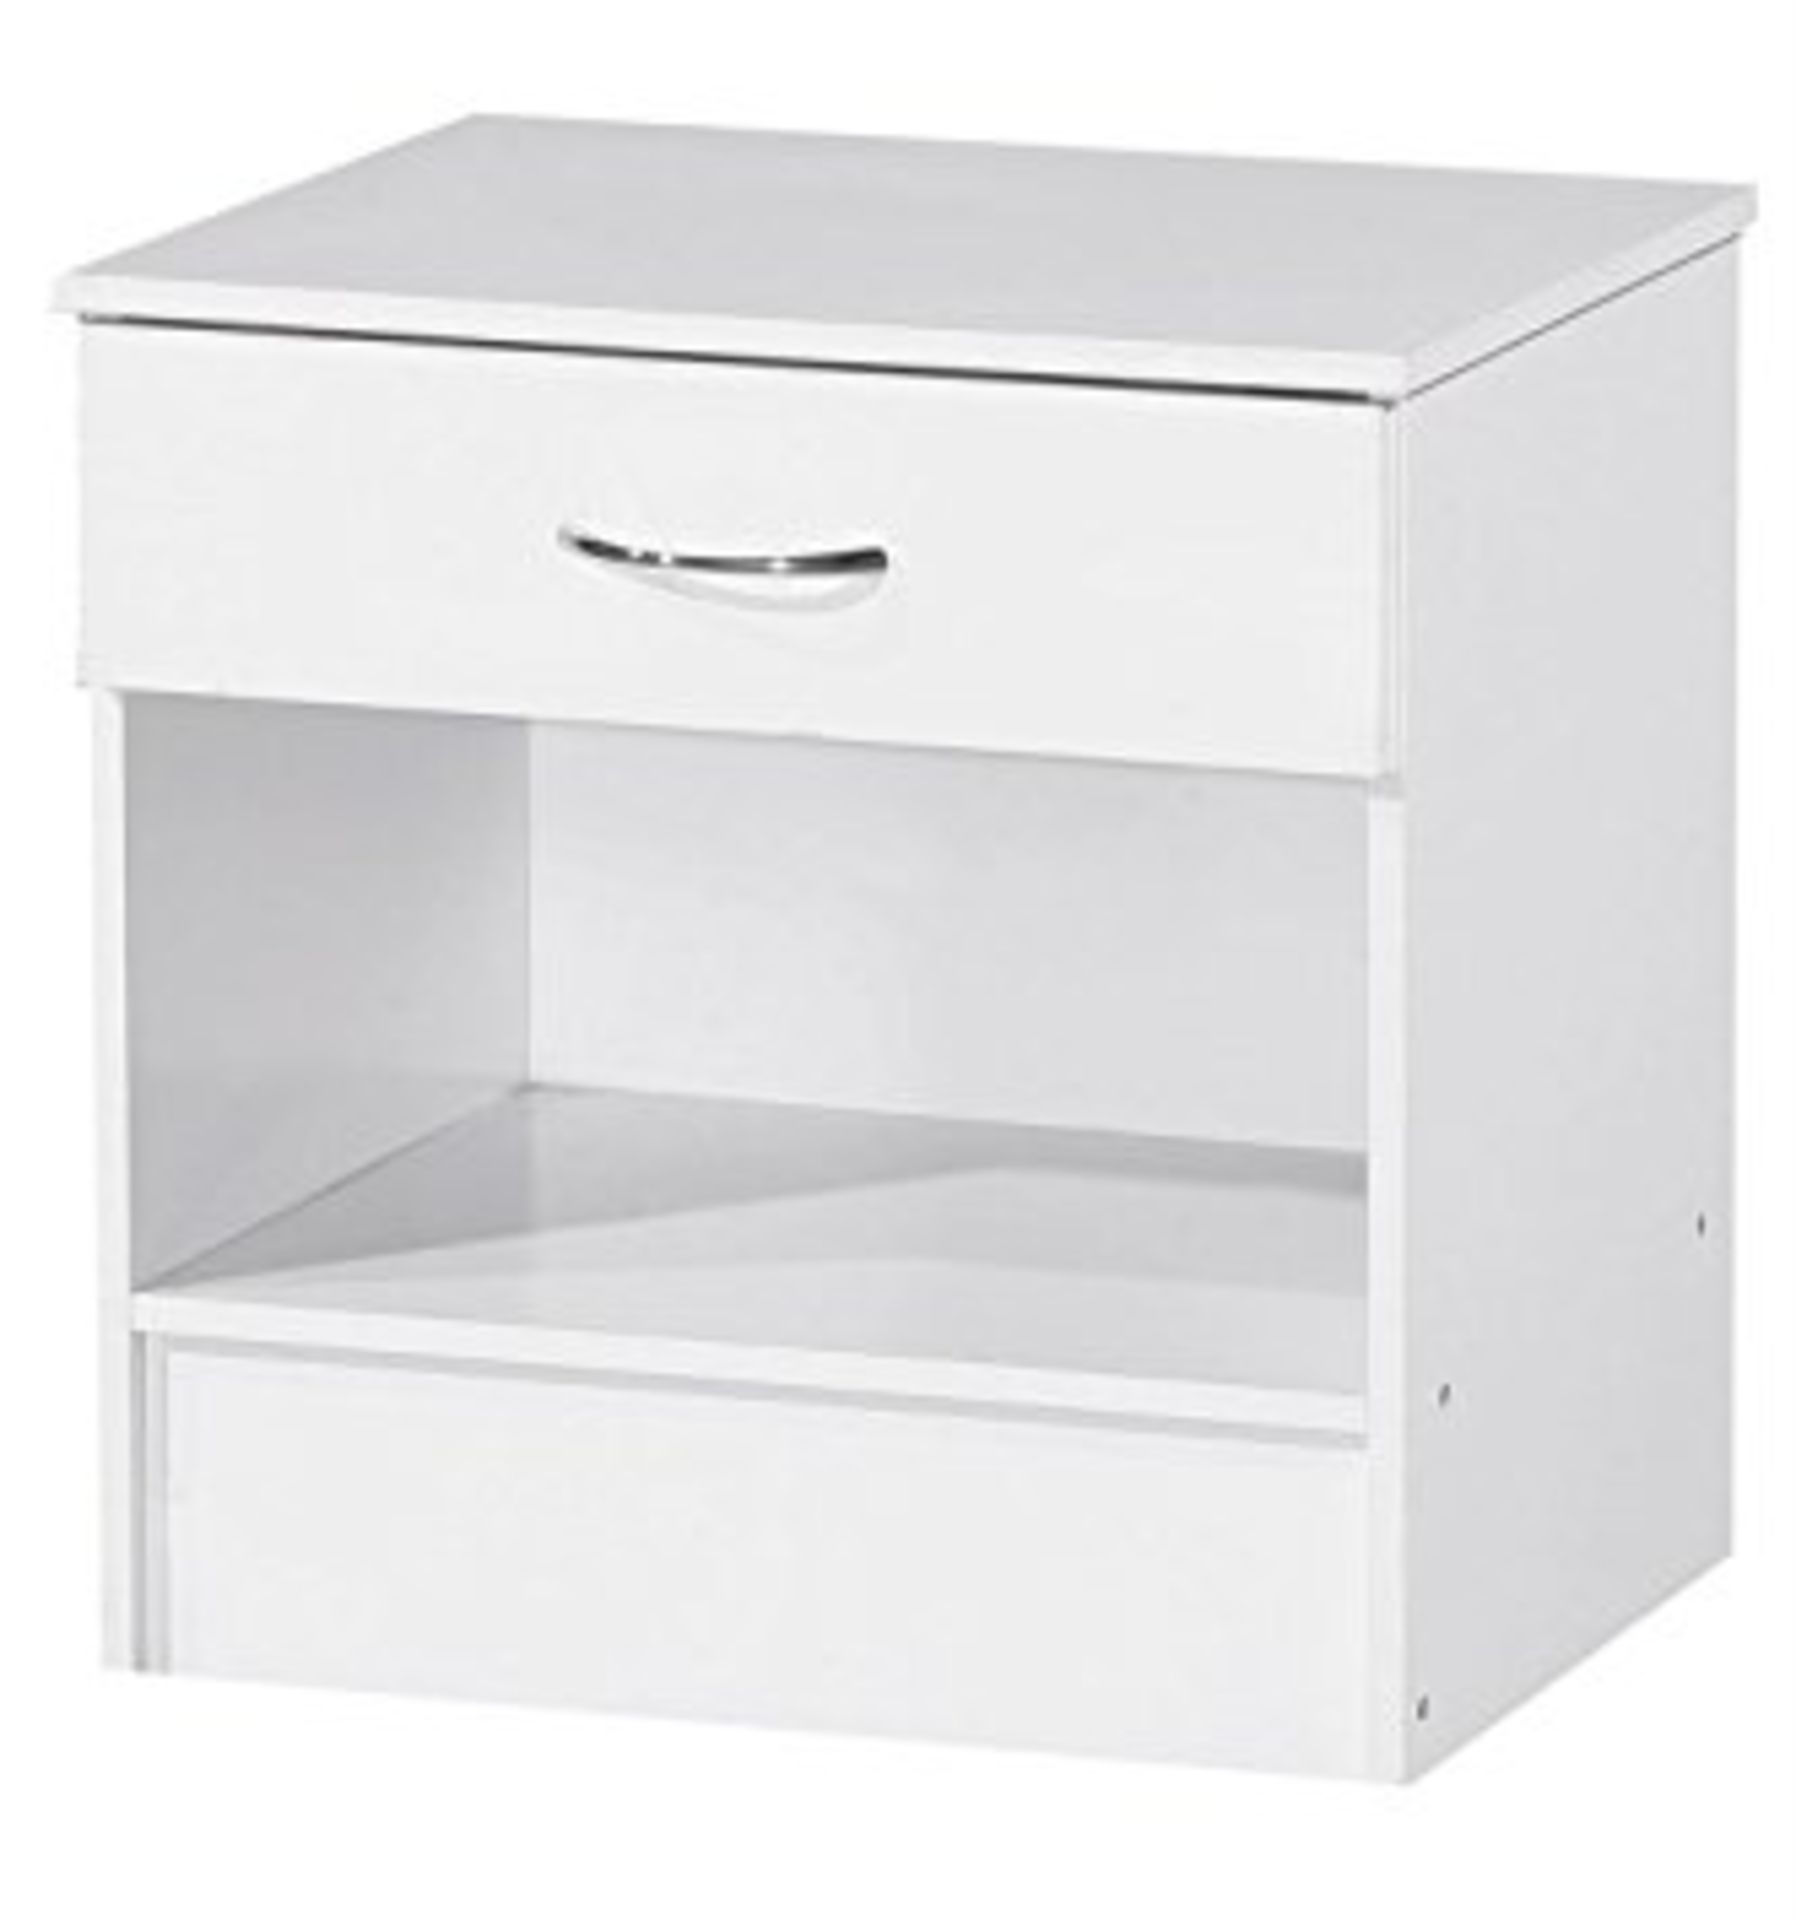 1 BRAND NEW BOXED ALPHA WHITE BEDSIDE CABINET